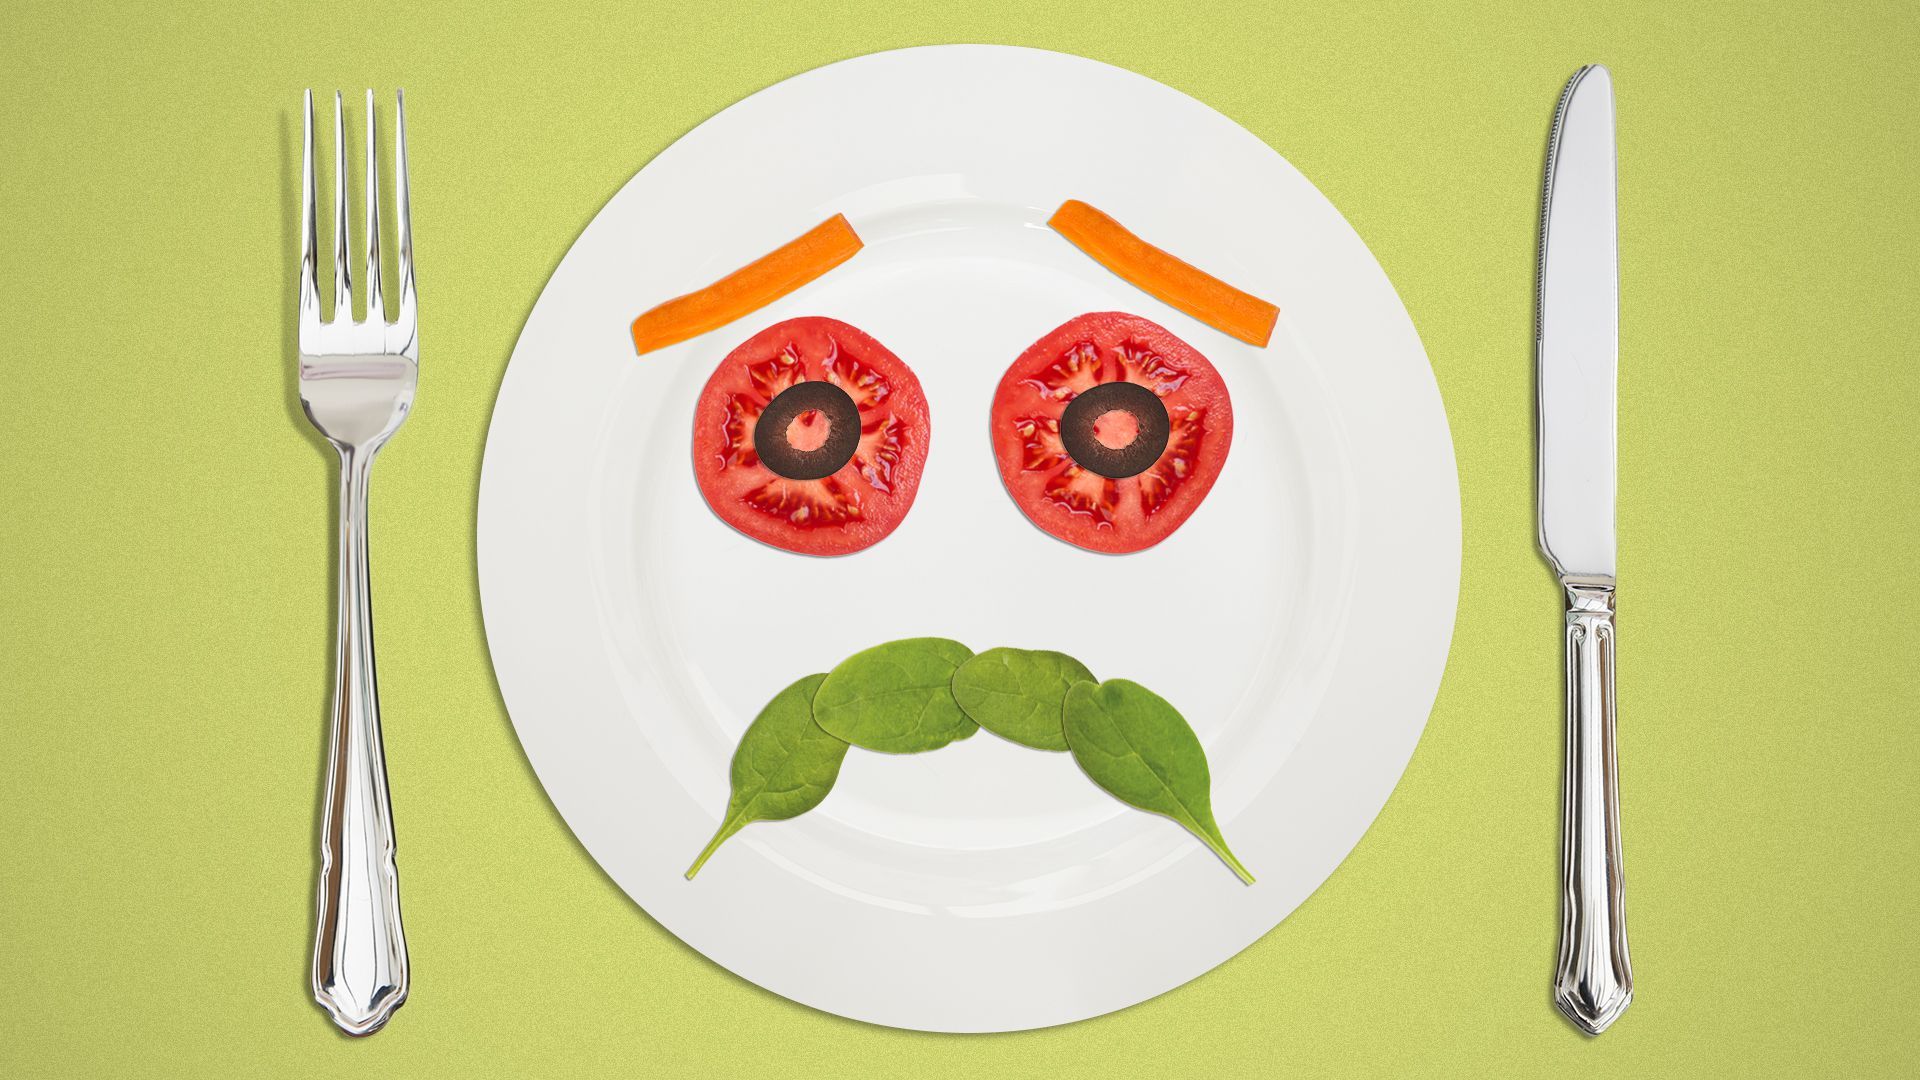 Illustration of salad ingredients forming a frowny face on a plate.